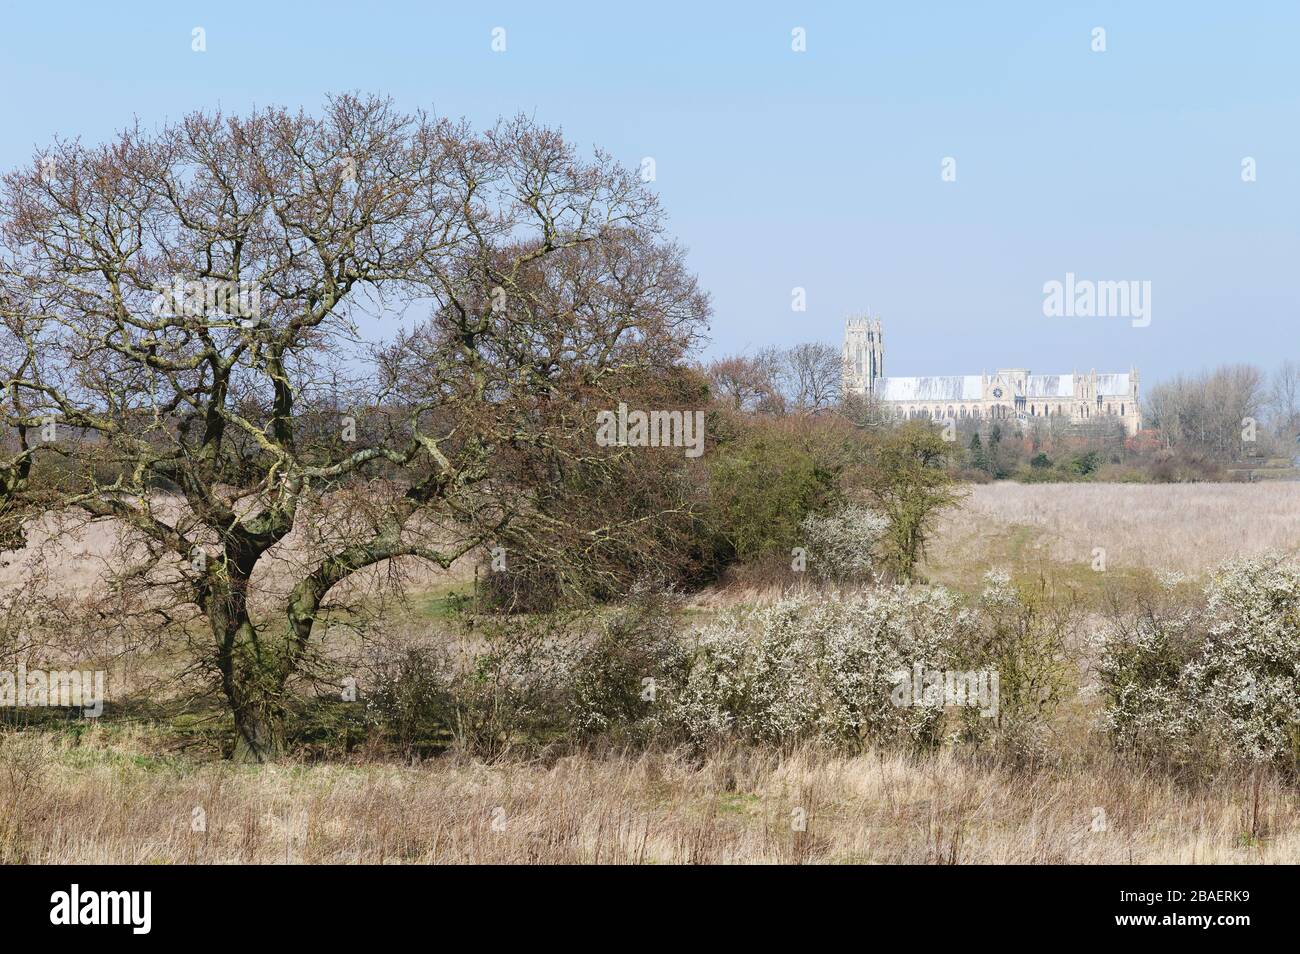 Fallow land with tall grasses with trees and fields with ancient minster on horizon on a bright, clear day in spring in Beverley, Yorkshire, UK. Stock Photo